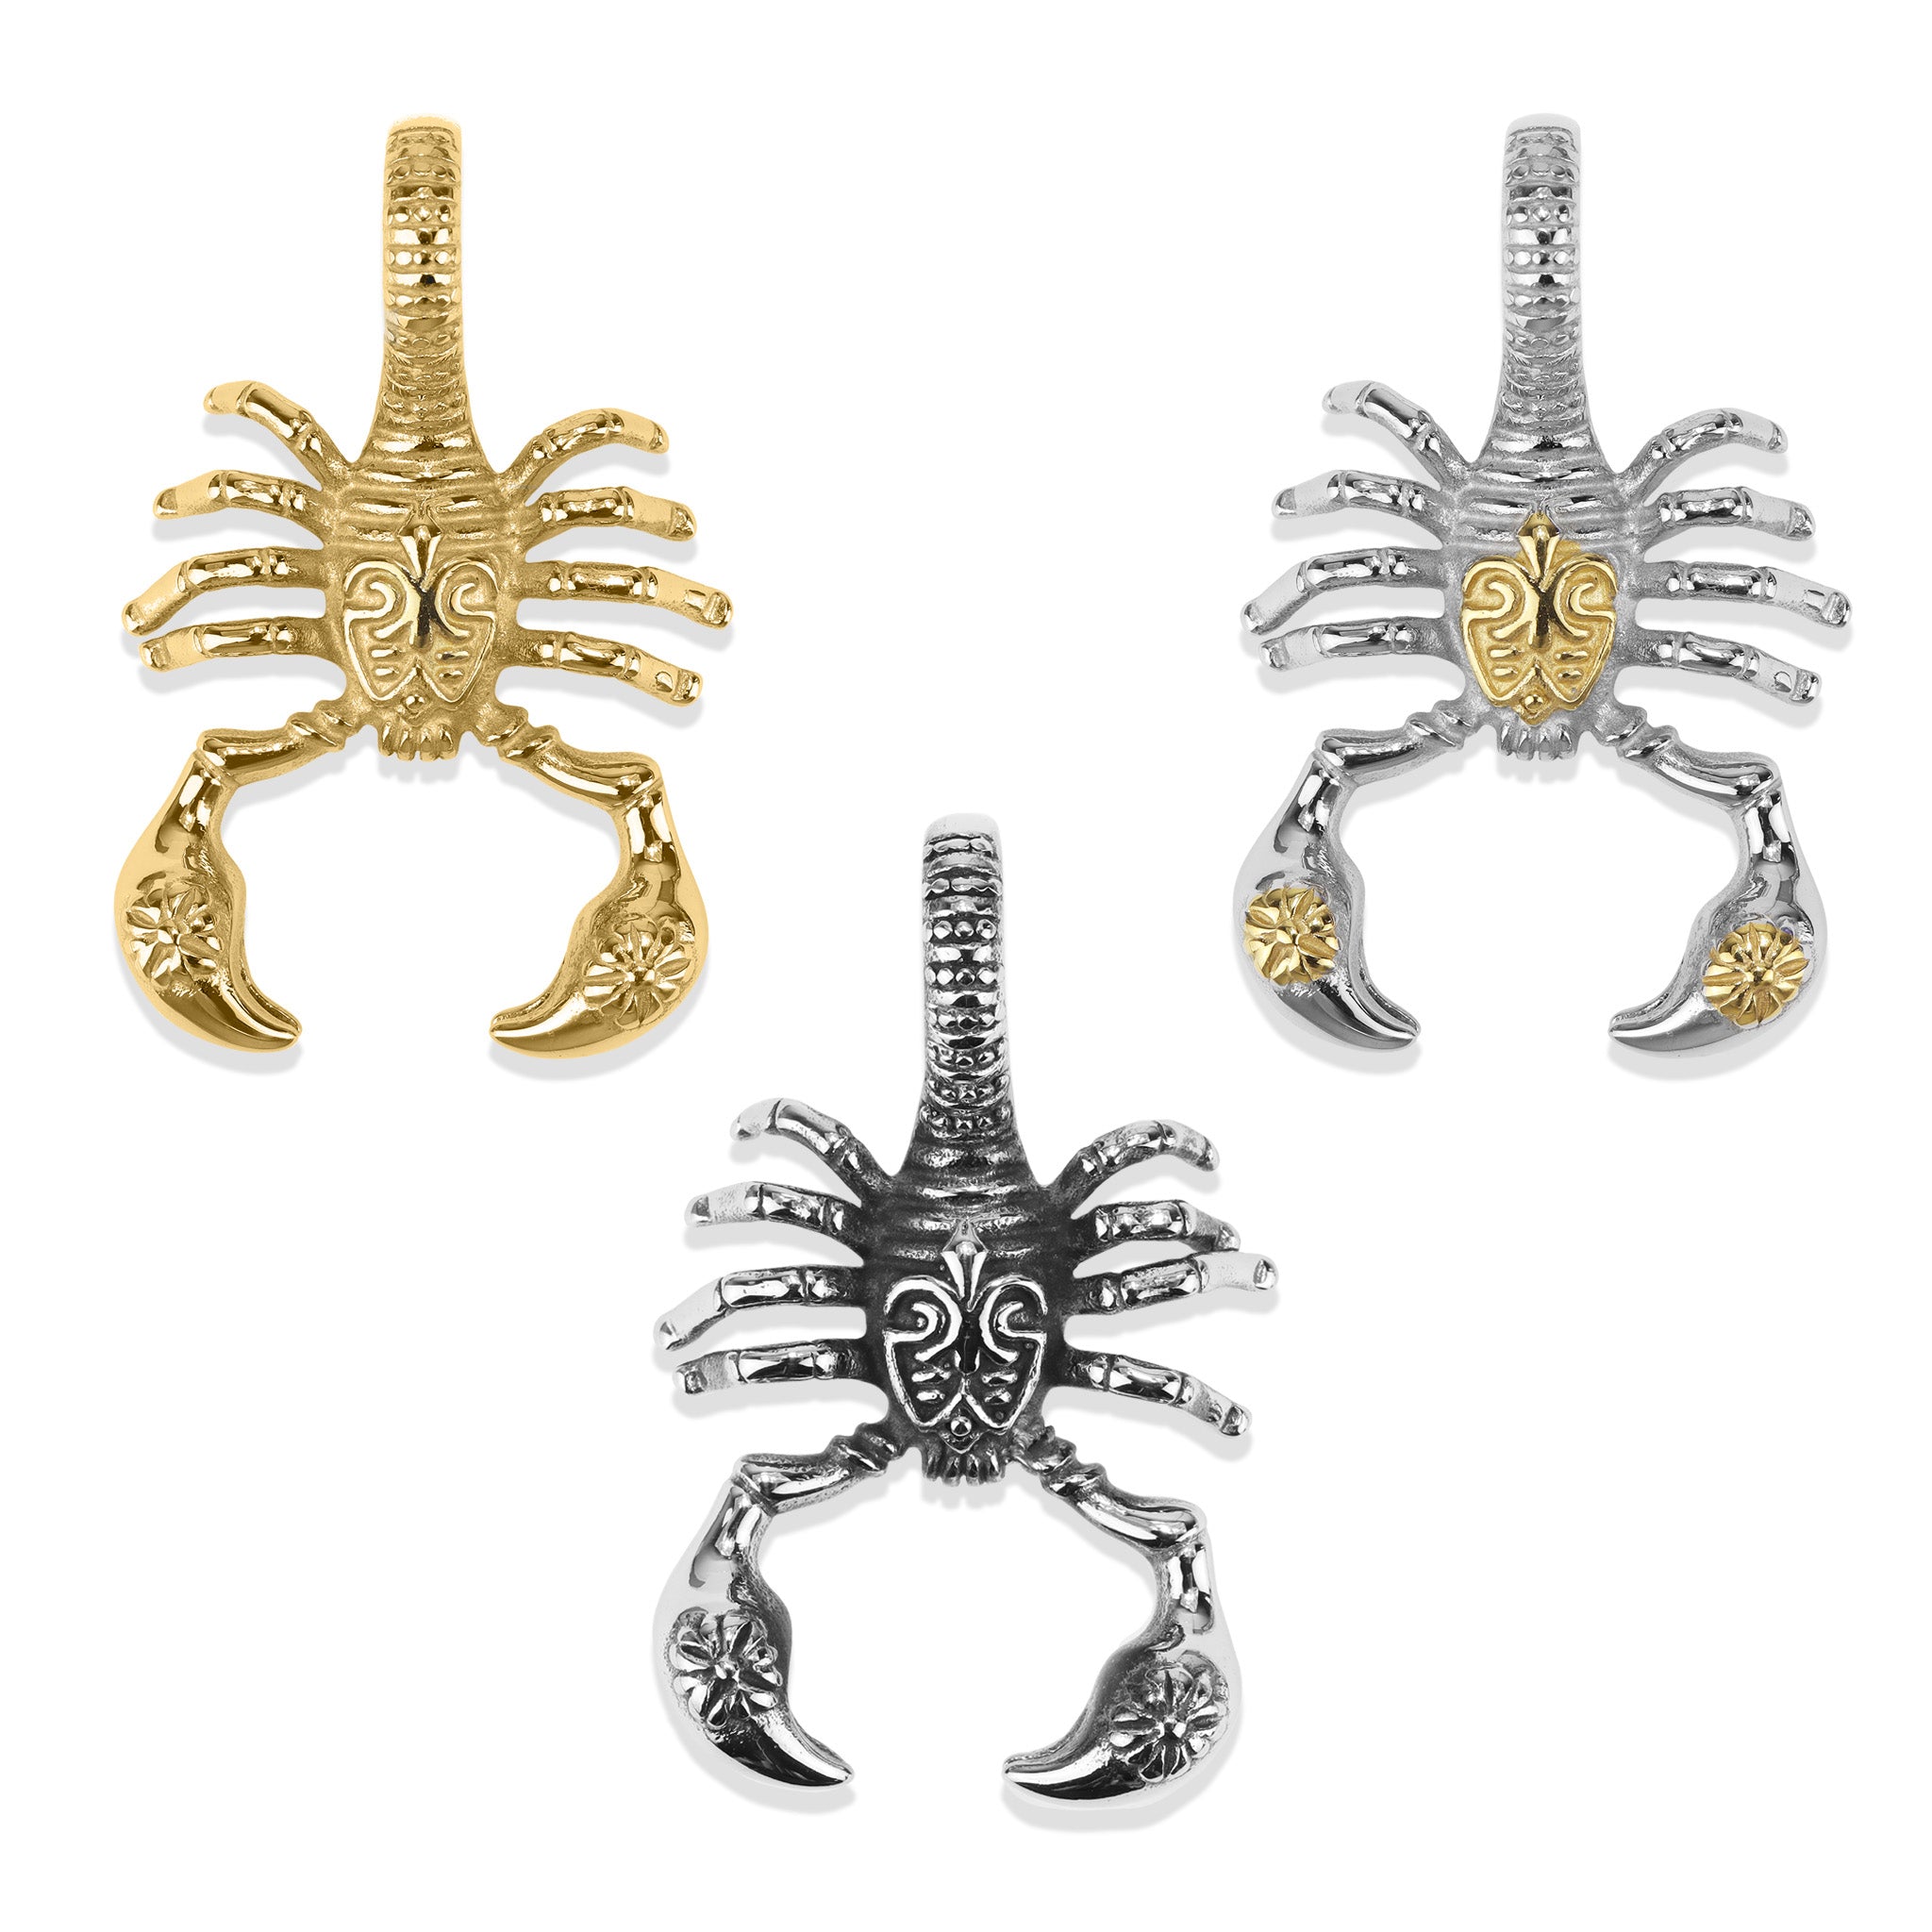 18K PVD Coated Stainless Steel Large Scorpion Pendant / PDL9001